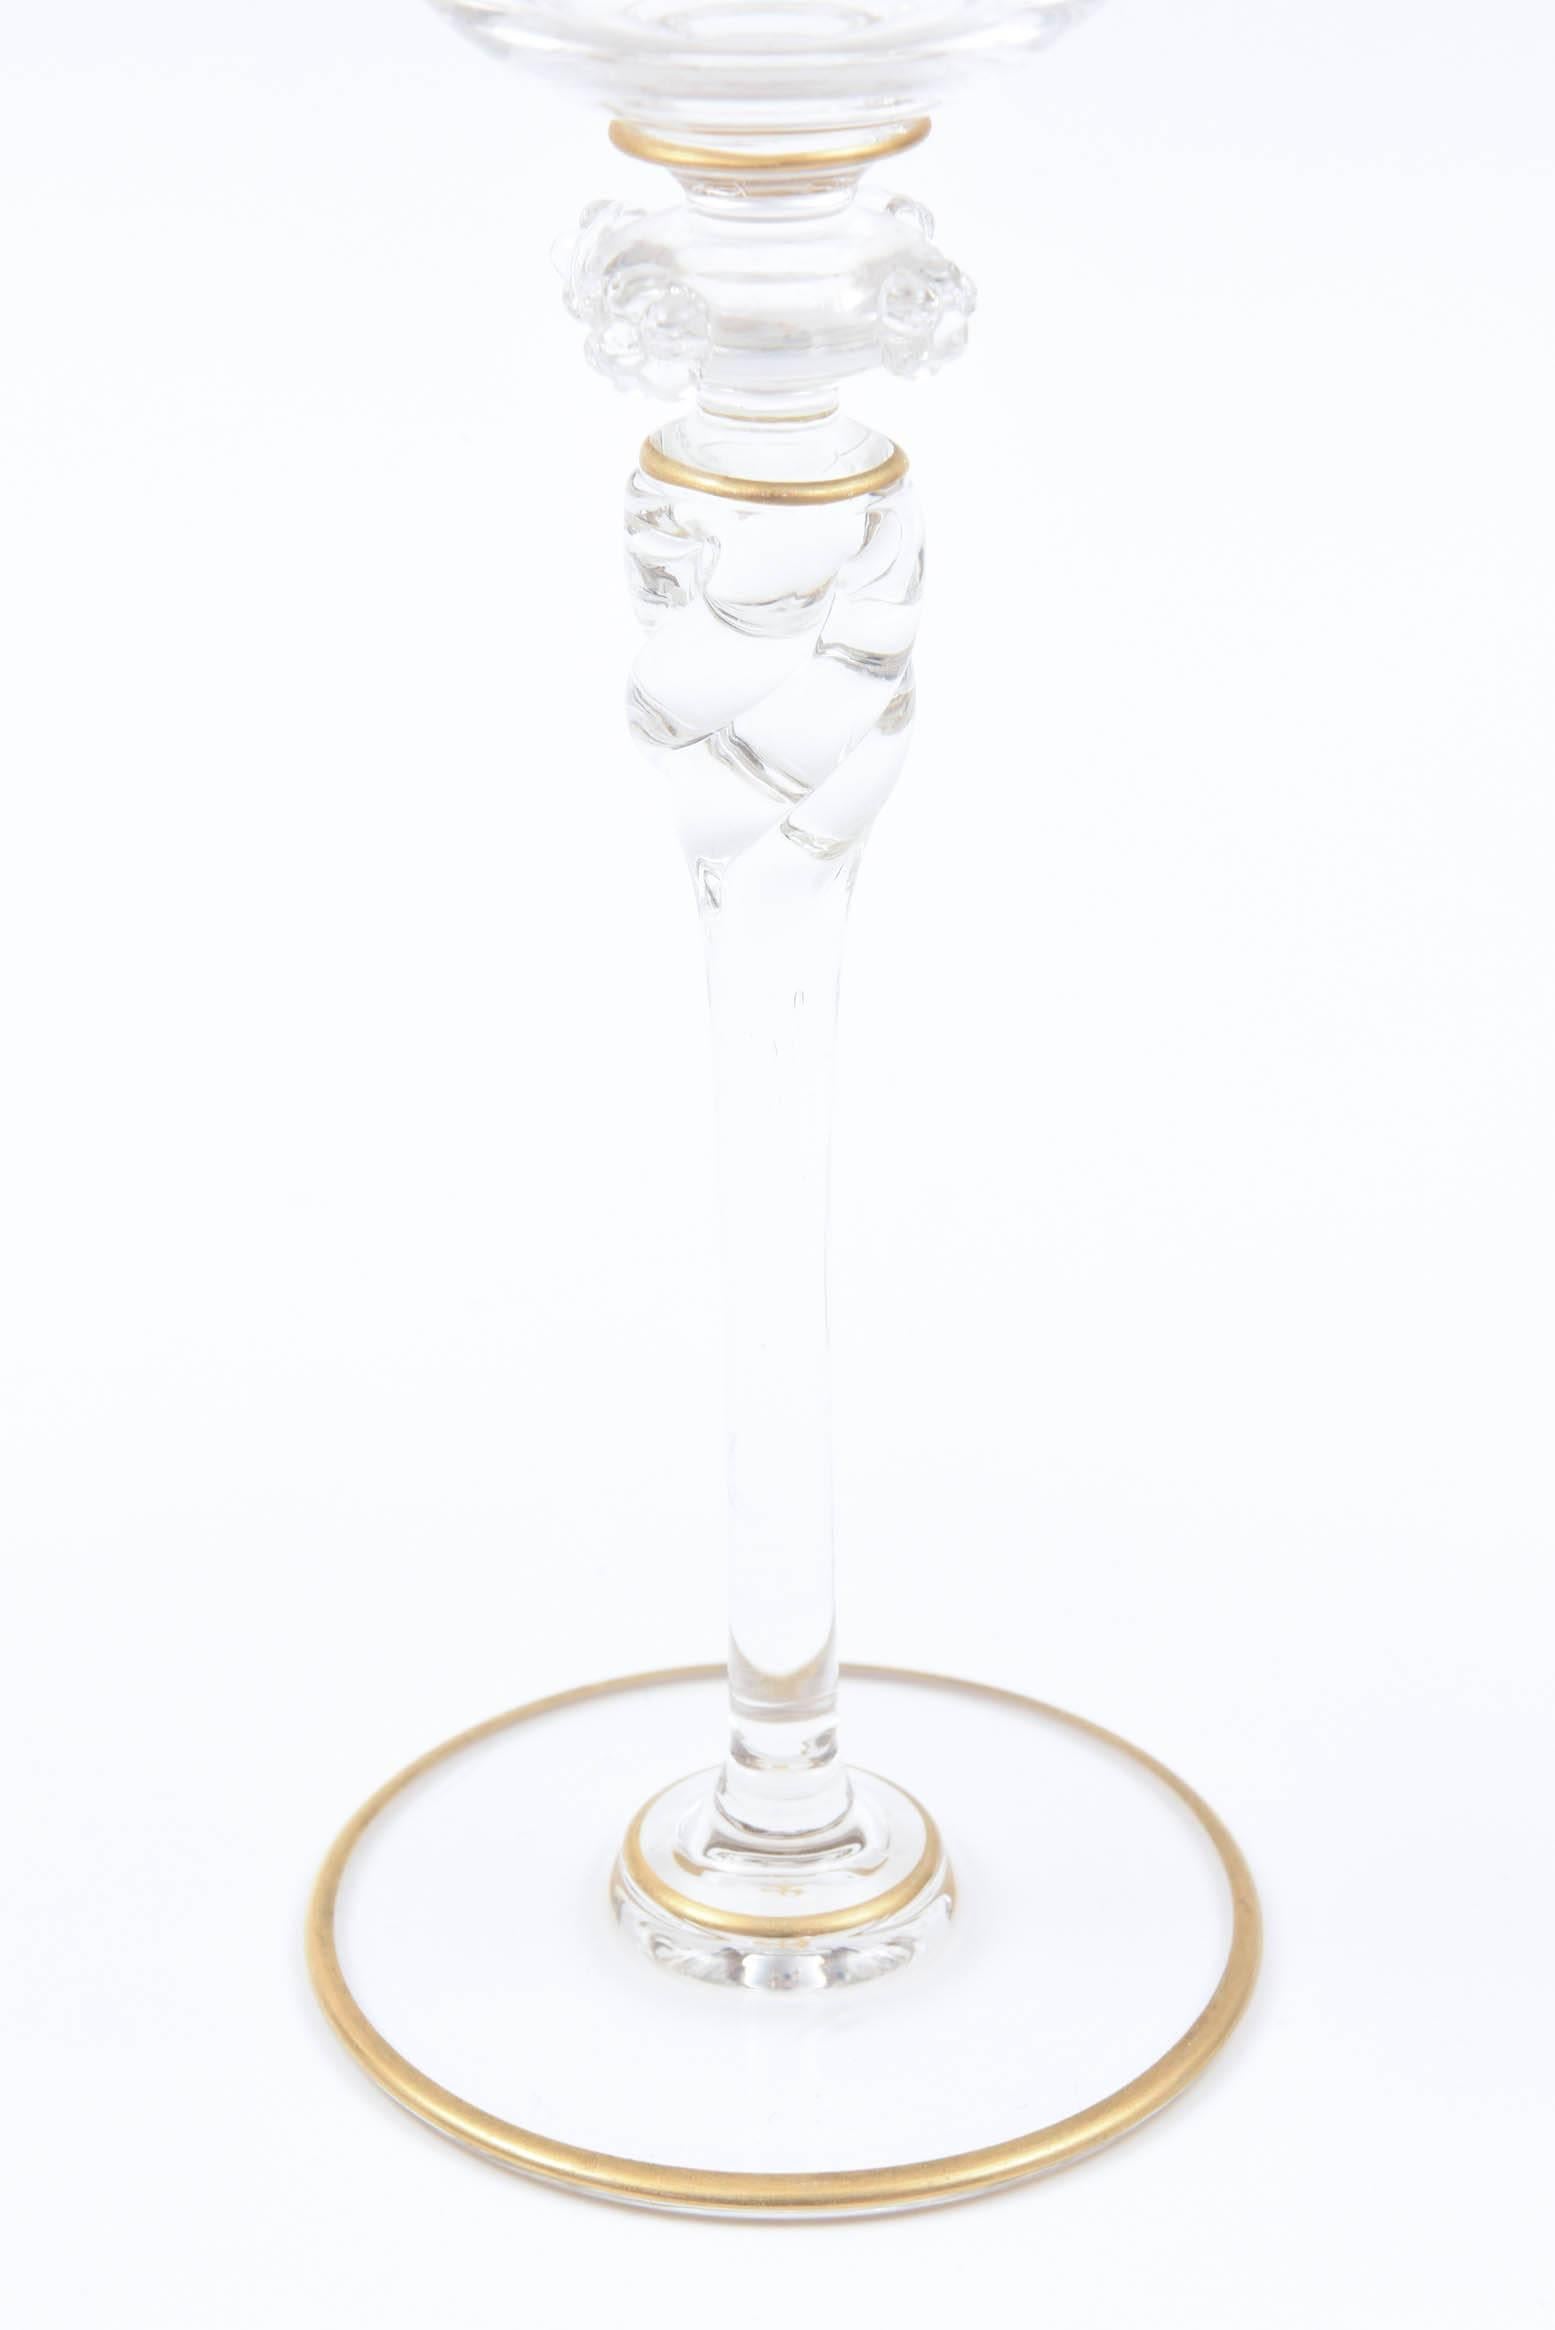 Hand-Crafted Four Tall Elegant Antique Moser Wine Goblets, Raised Gold & Hand-Painted Florals